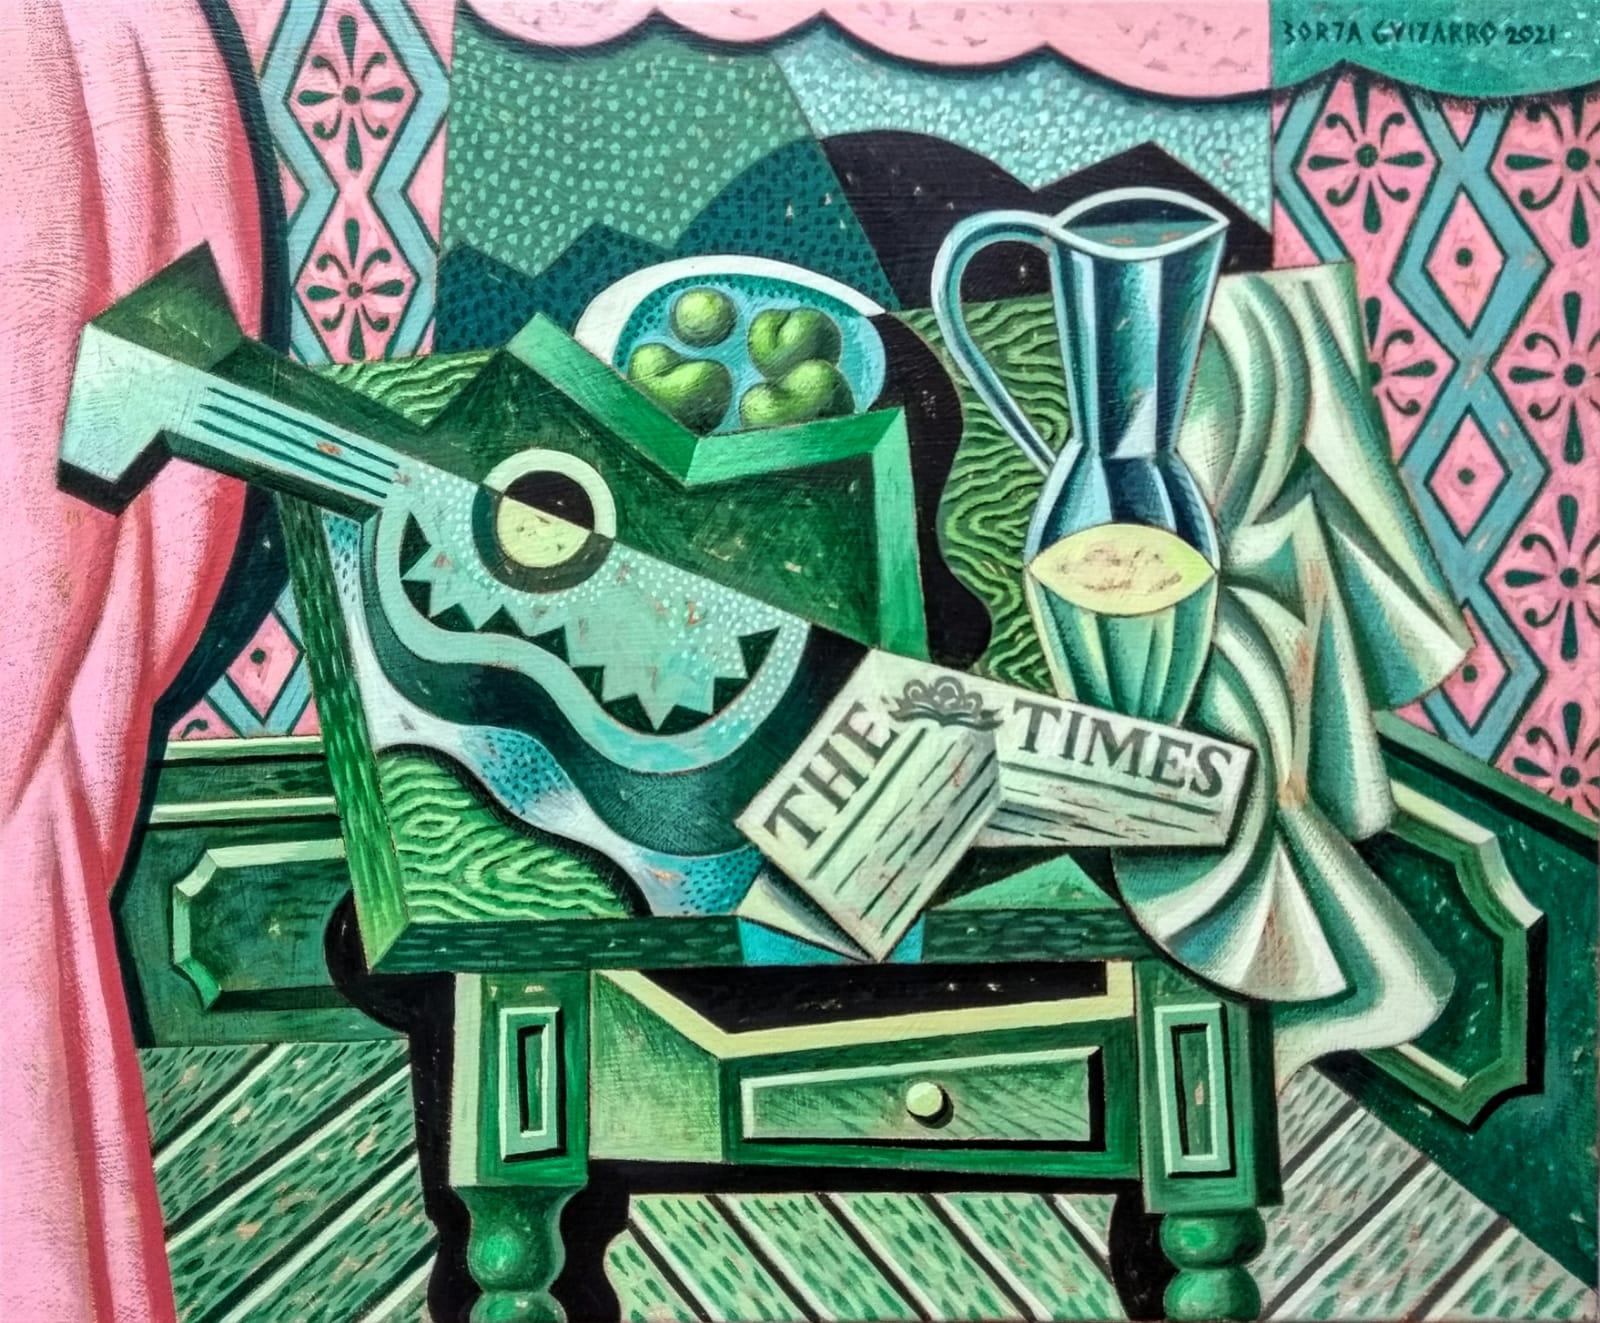 The Green Table - still life contemporary abstract cubism artwork mixed media